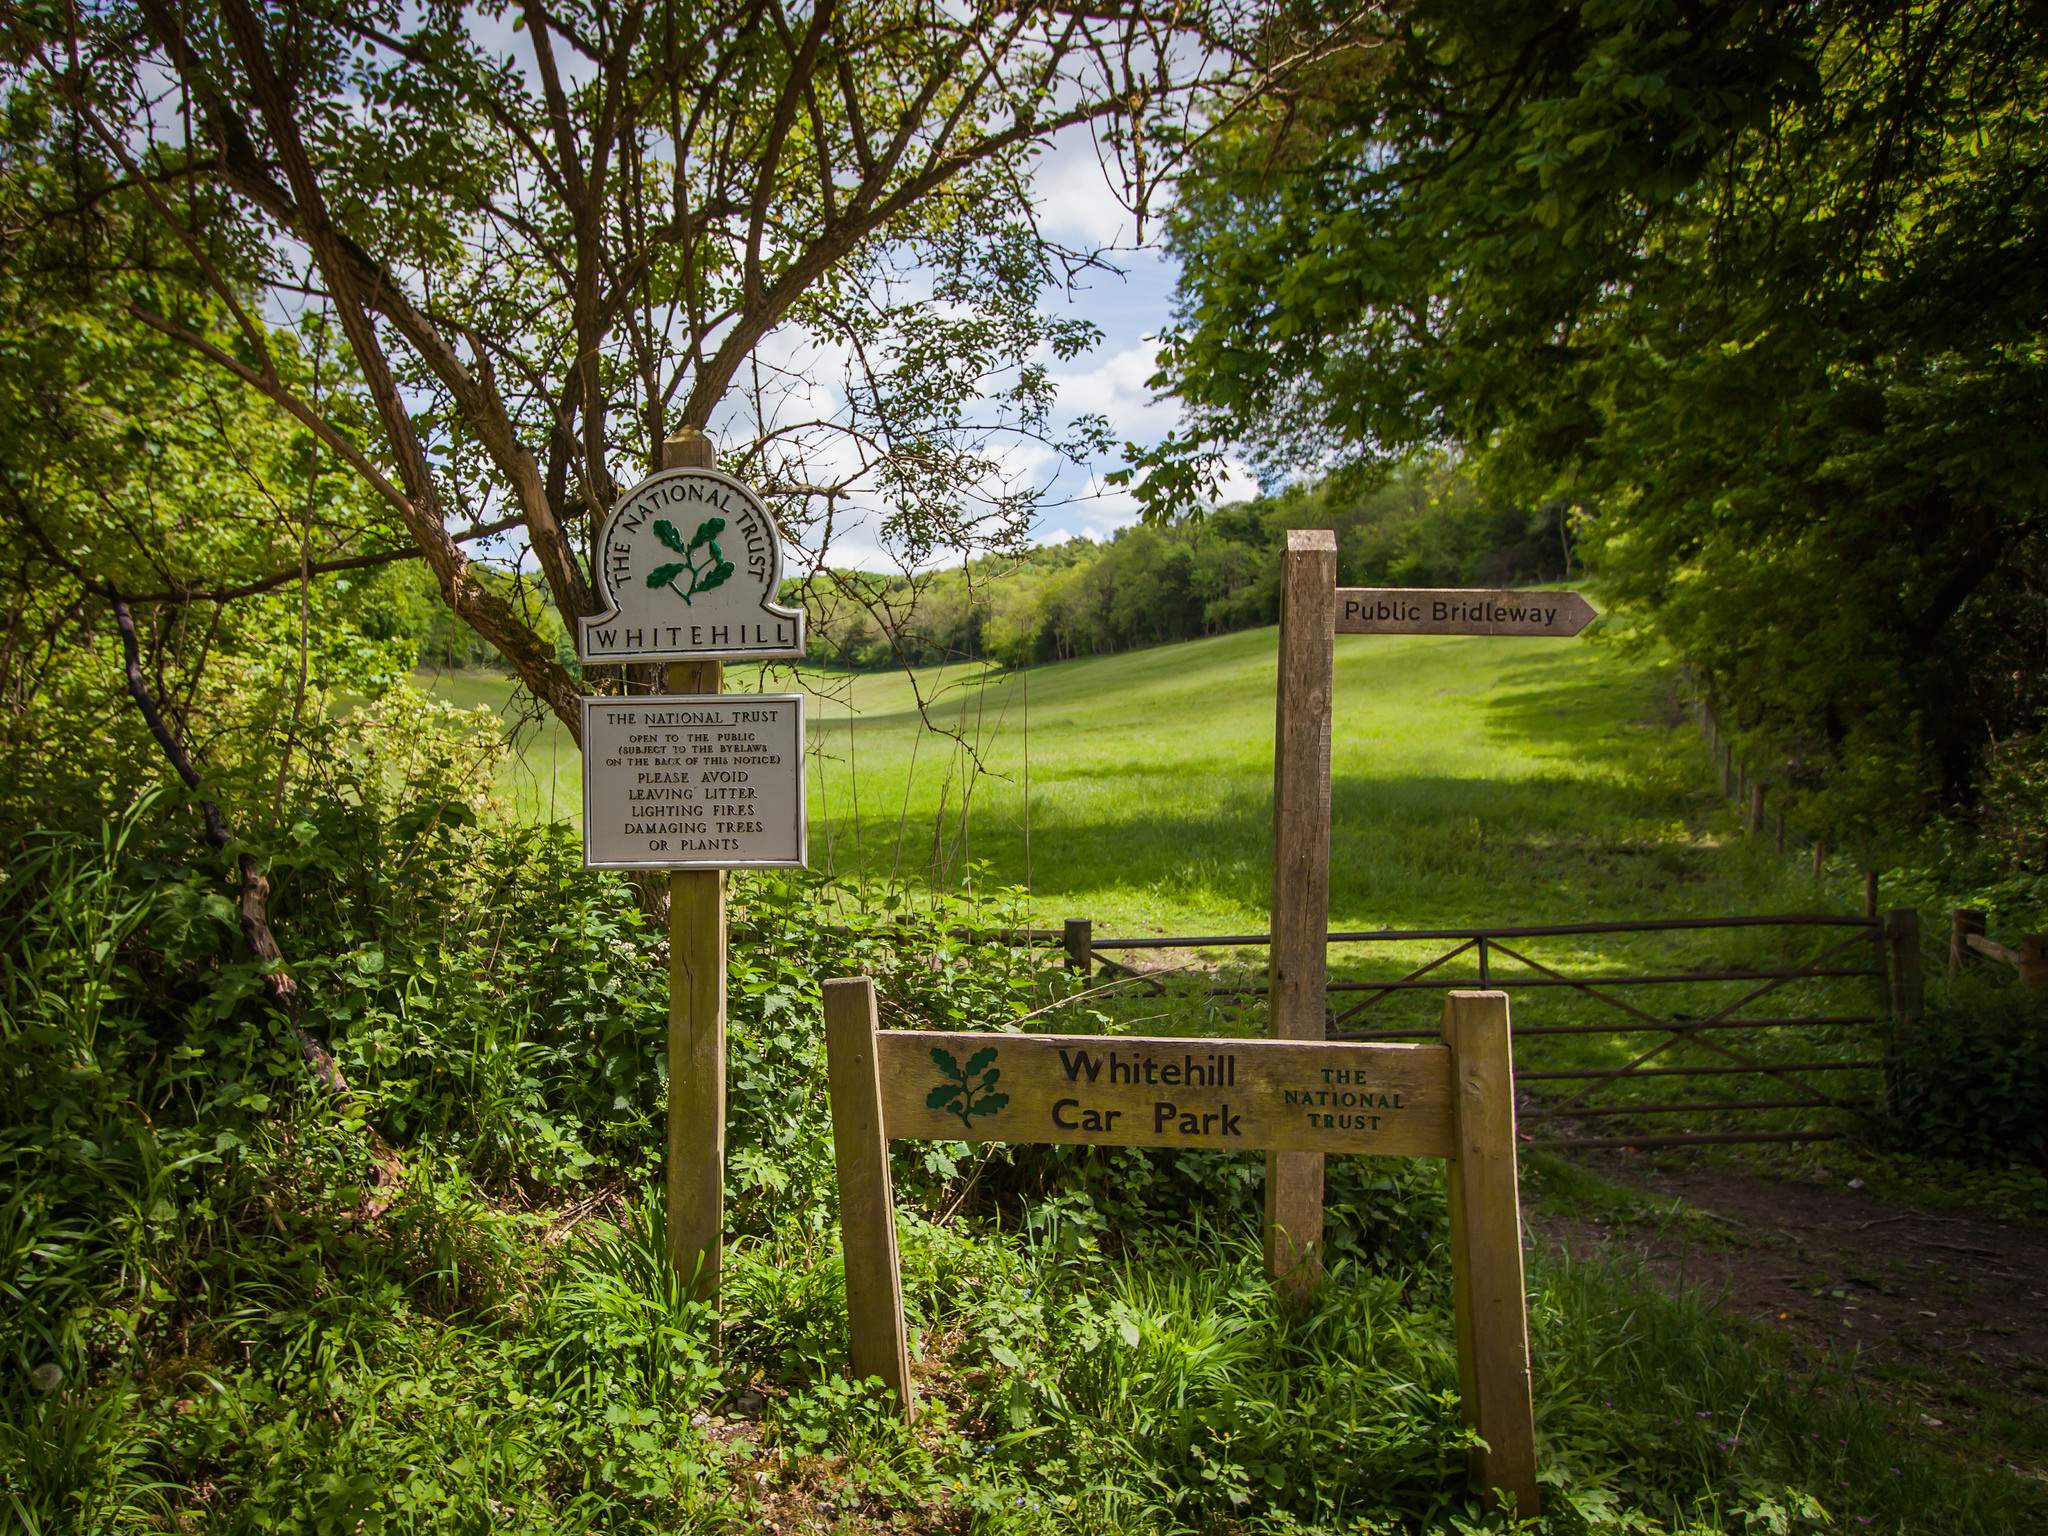 Signs in the country park, maintained by National Trust